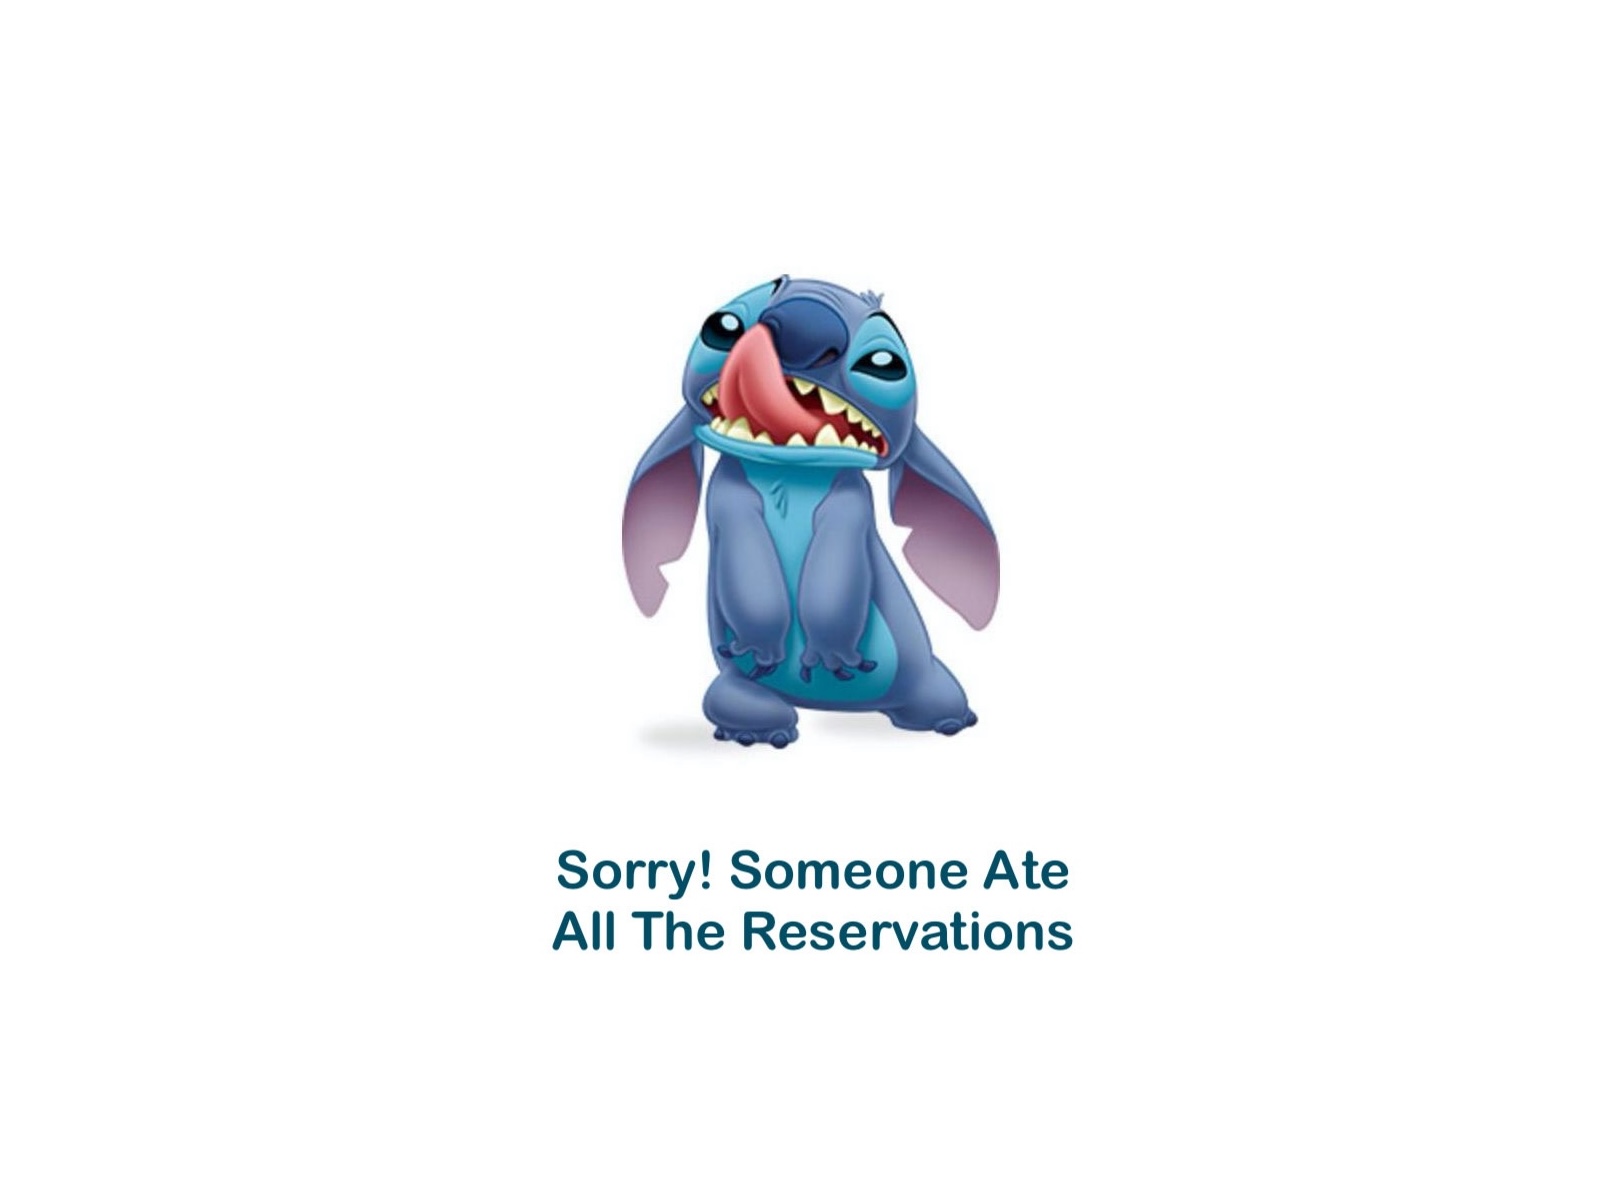 Stitch-eaten-all-reservations